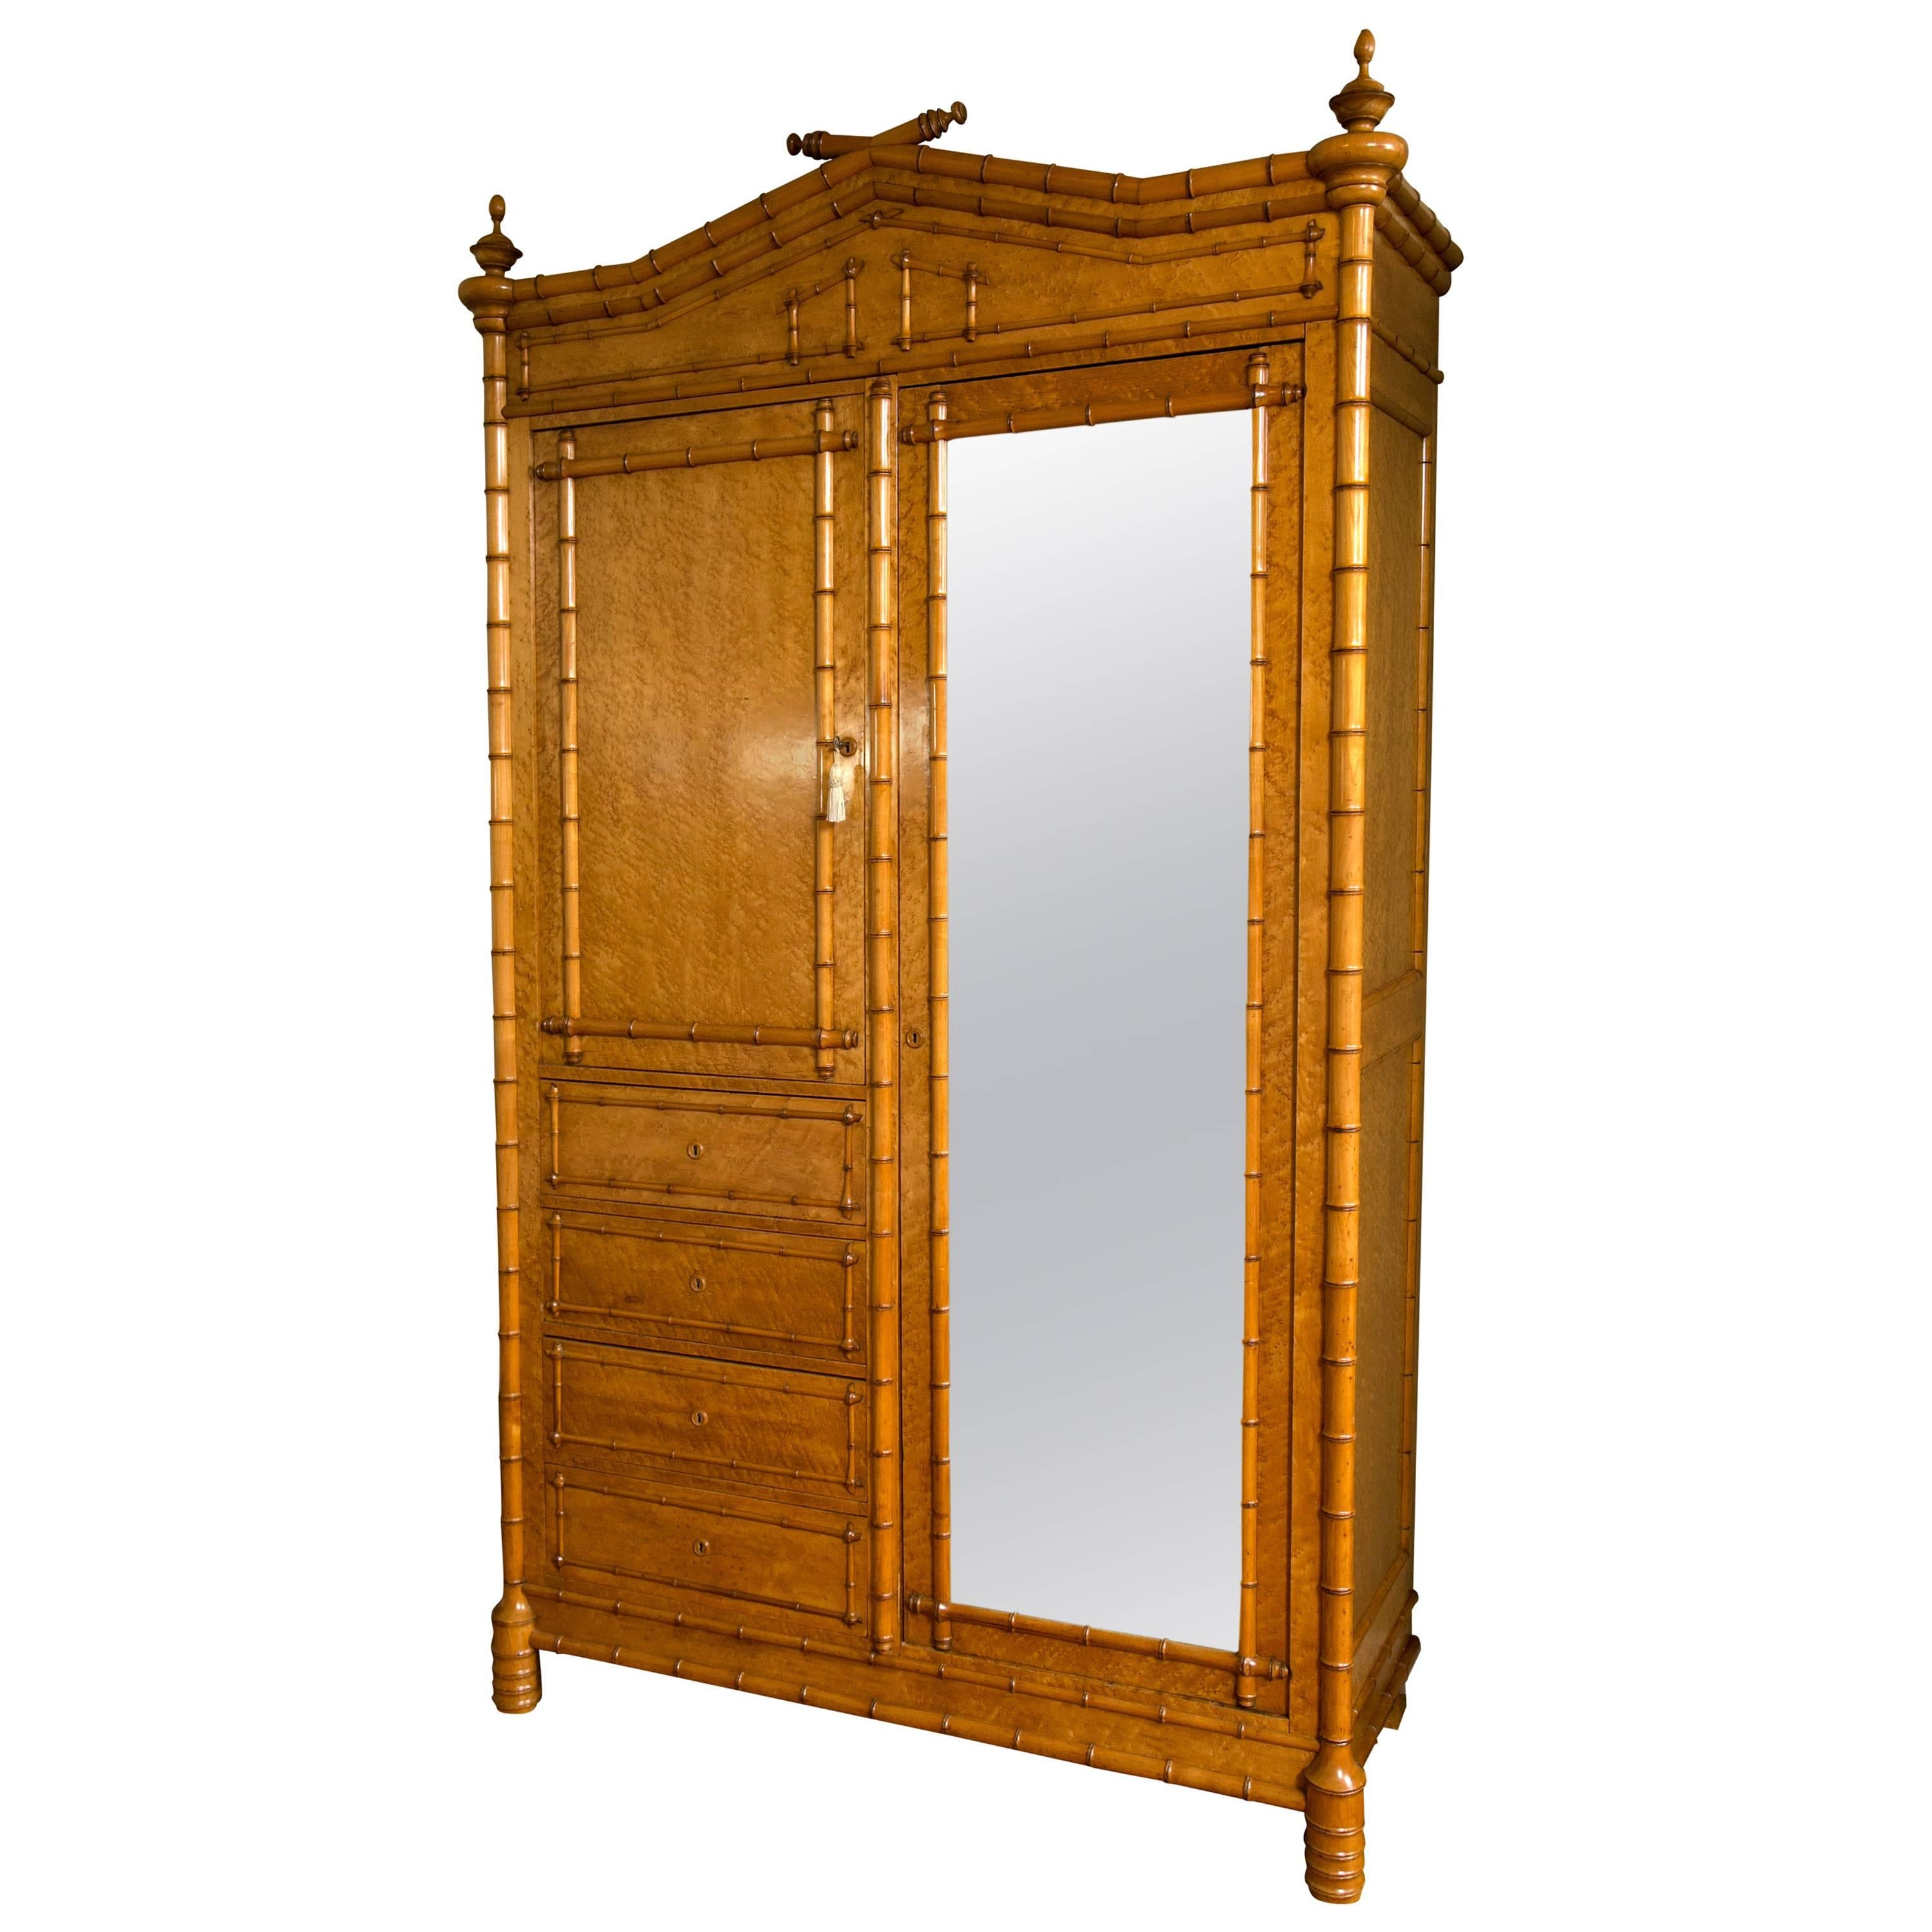 Aesthetic Movement Maple Faux Bamboo Armoire Attributed to R. J. Horner & Co.